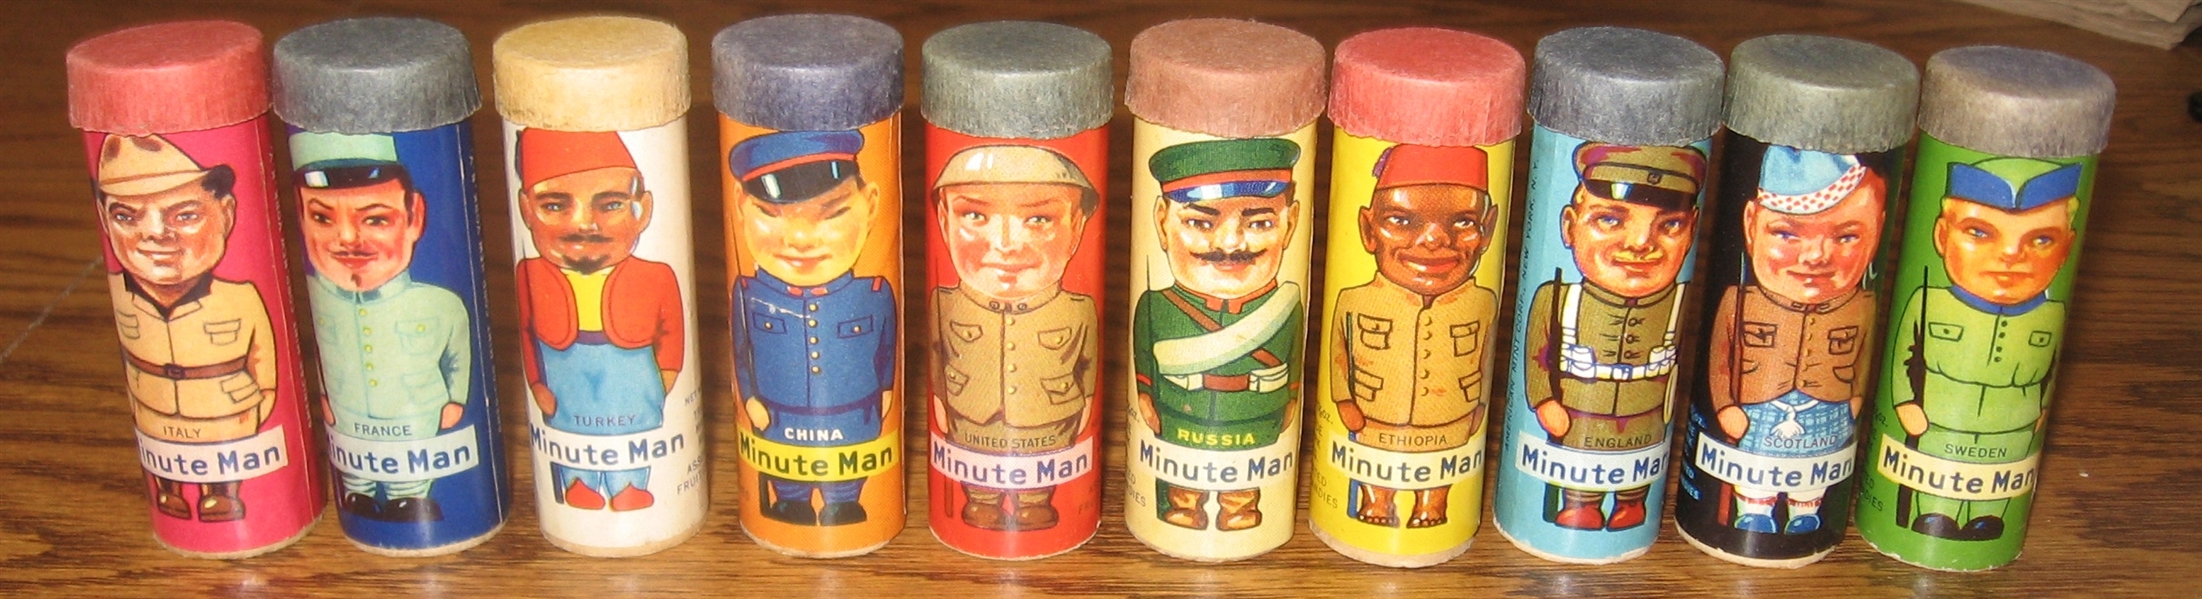 1930s R43 Minute Man Candy Cylinders Complete Set (10) American Mint Co.